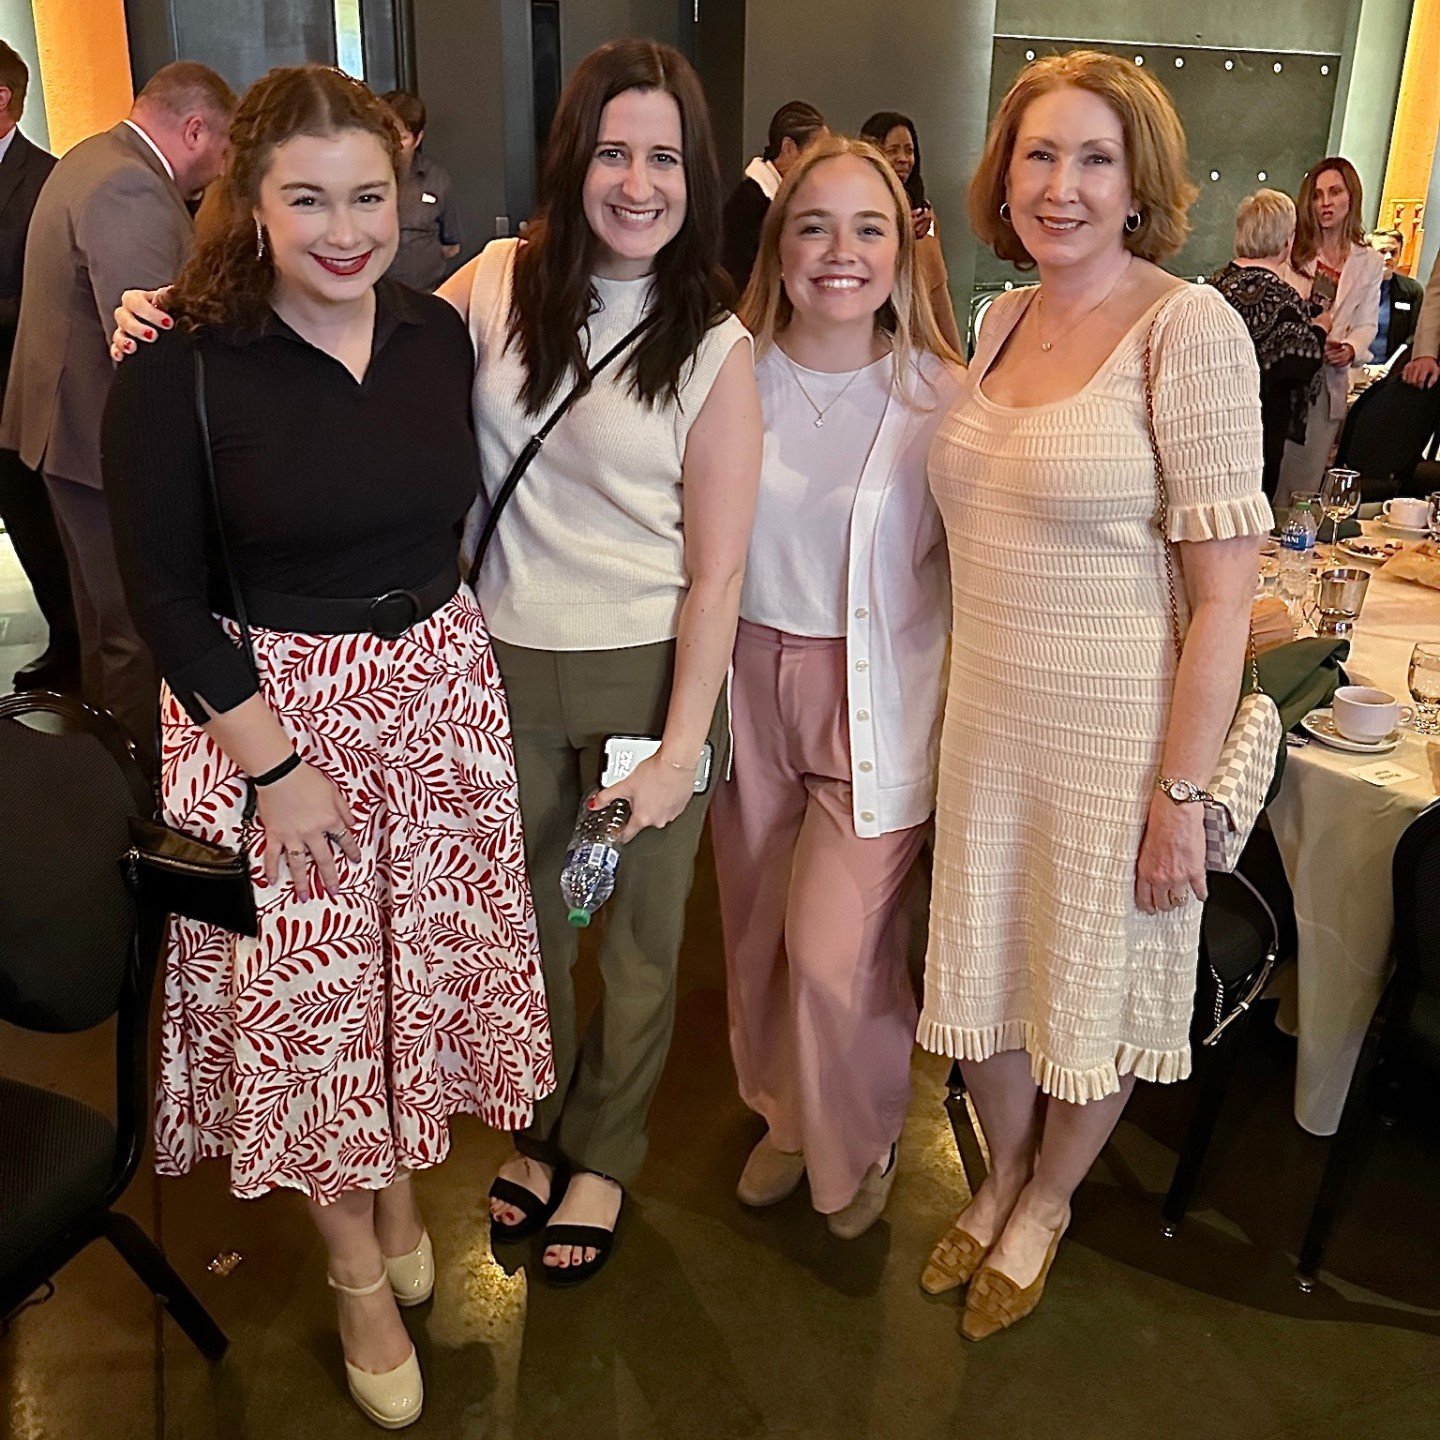 Big congratulations to @unitedwayglv on an amazing Celebration of Caring event last week 🎉 

#SocialT team members, Tina, Rachel, Kelly, and Cecelia, had the pleasure of attending. It was inspiring to see the collaborative spirit and impact of commu